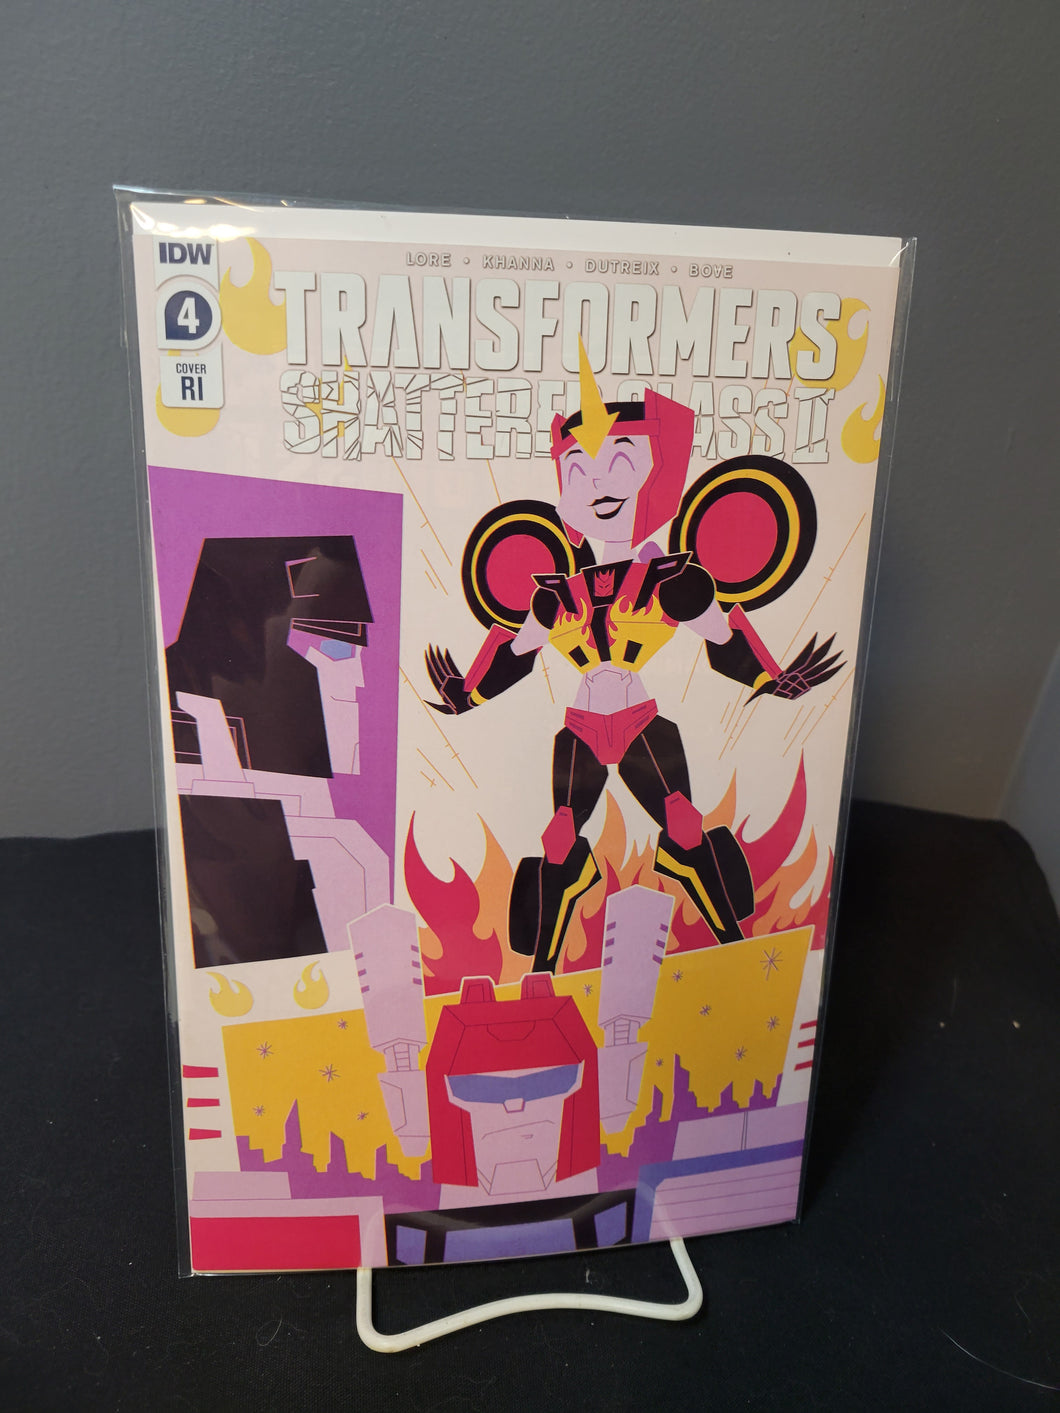 Transformers Shattered Glass II 4 1:10 Ratio Variant